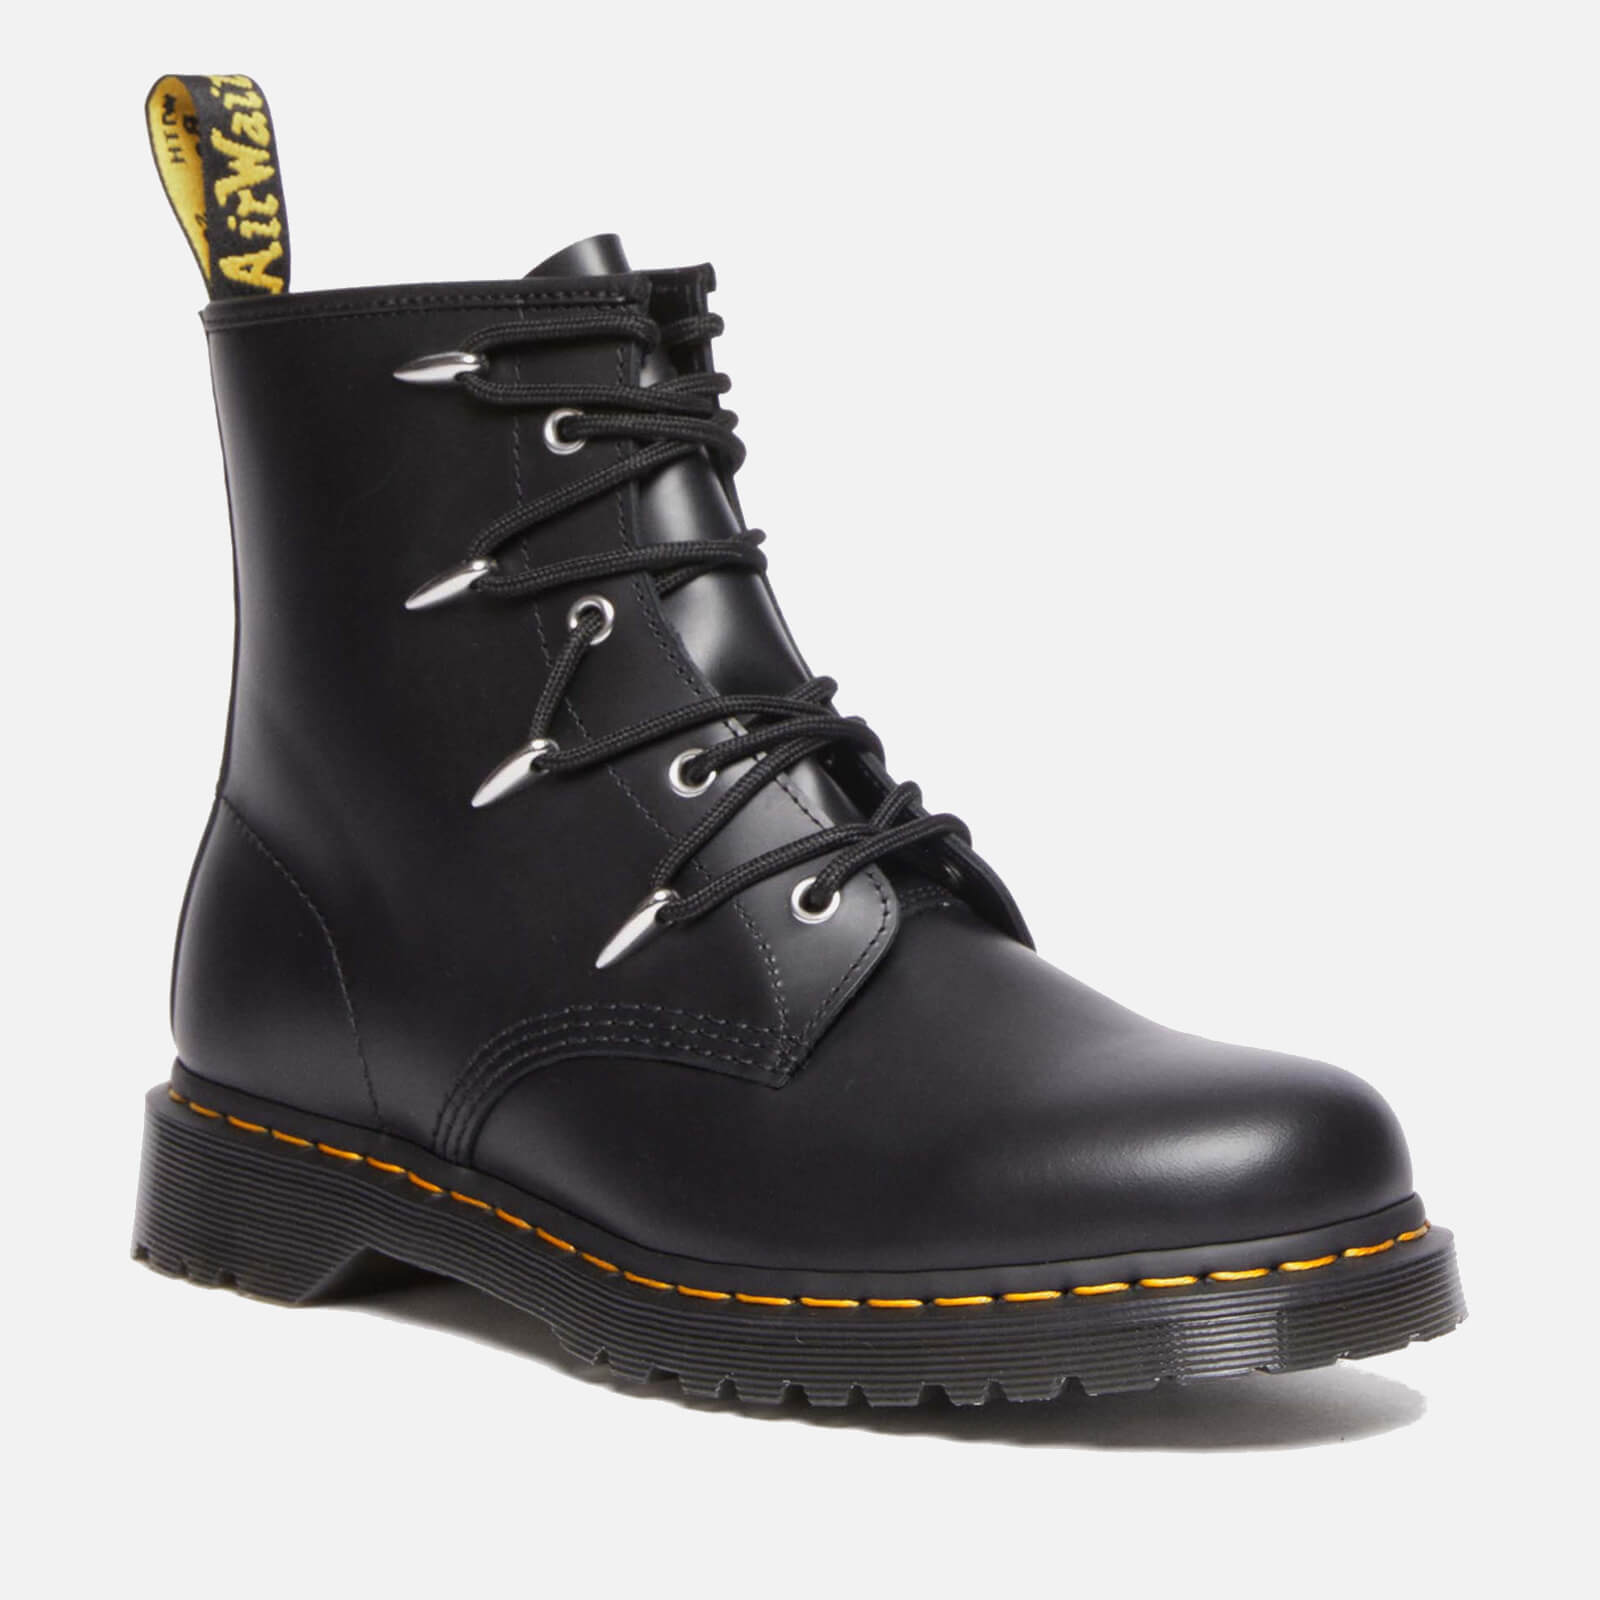 Dr. Martens Women’s 1460 Leather 8-Eye Boots